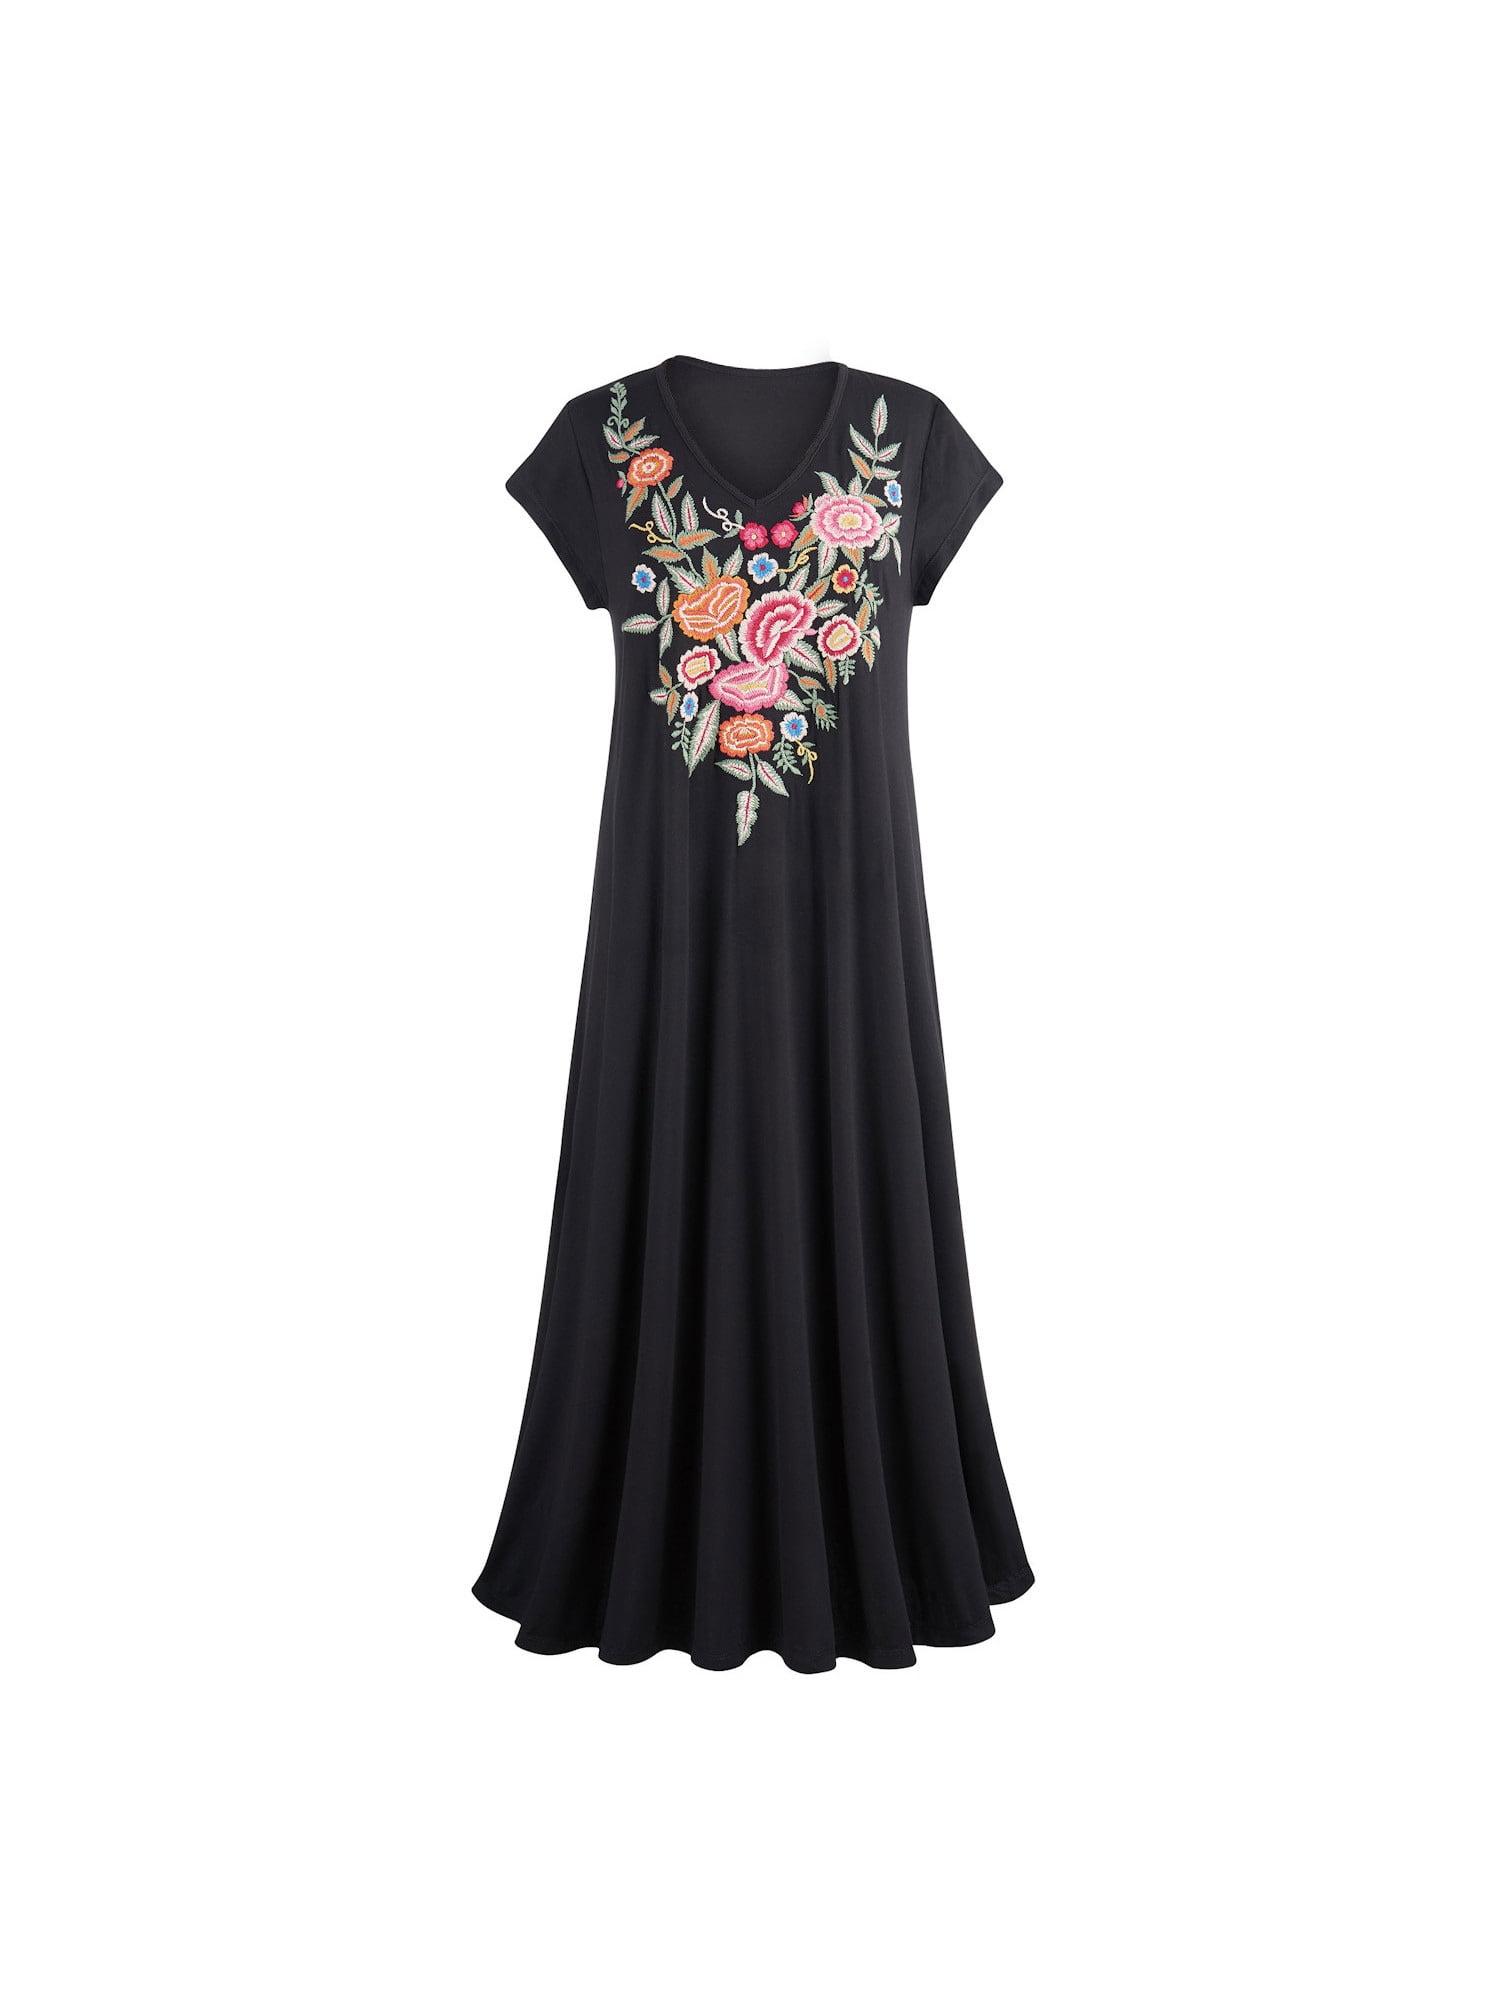 Caite Womens Embroidered T-Shirt Dress - Ana Black Floral Short Sleeve ...